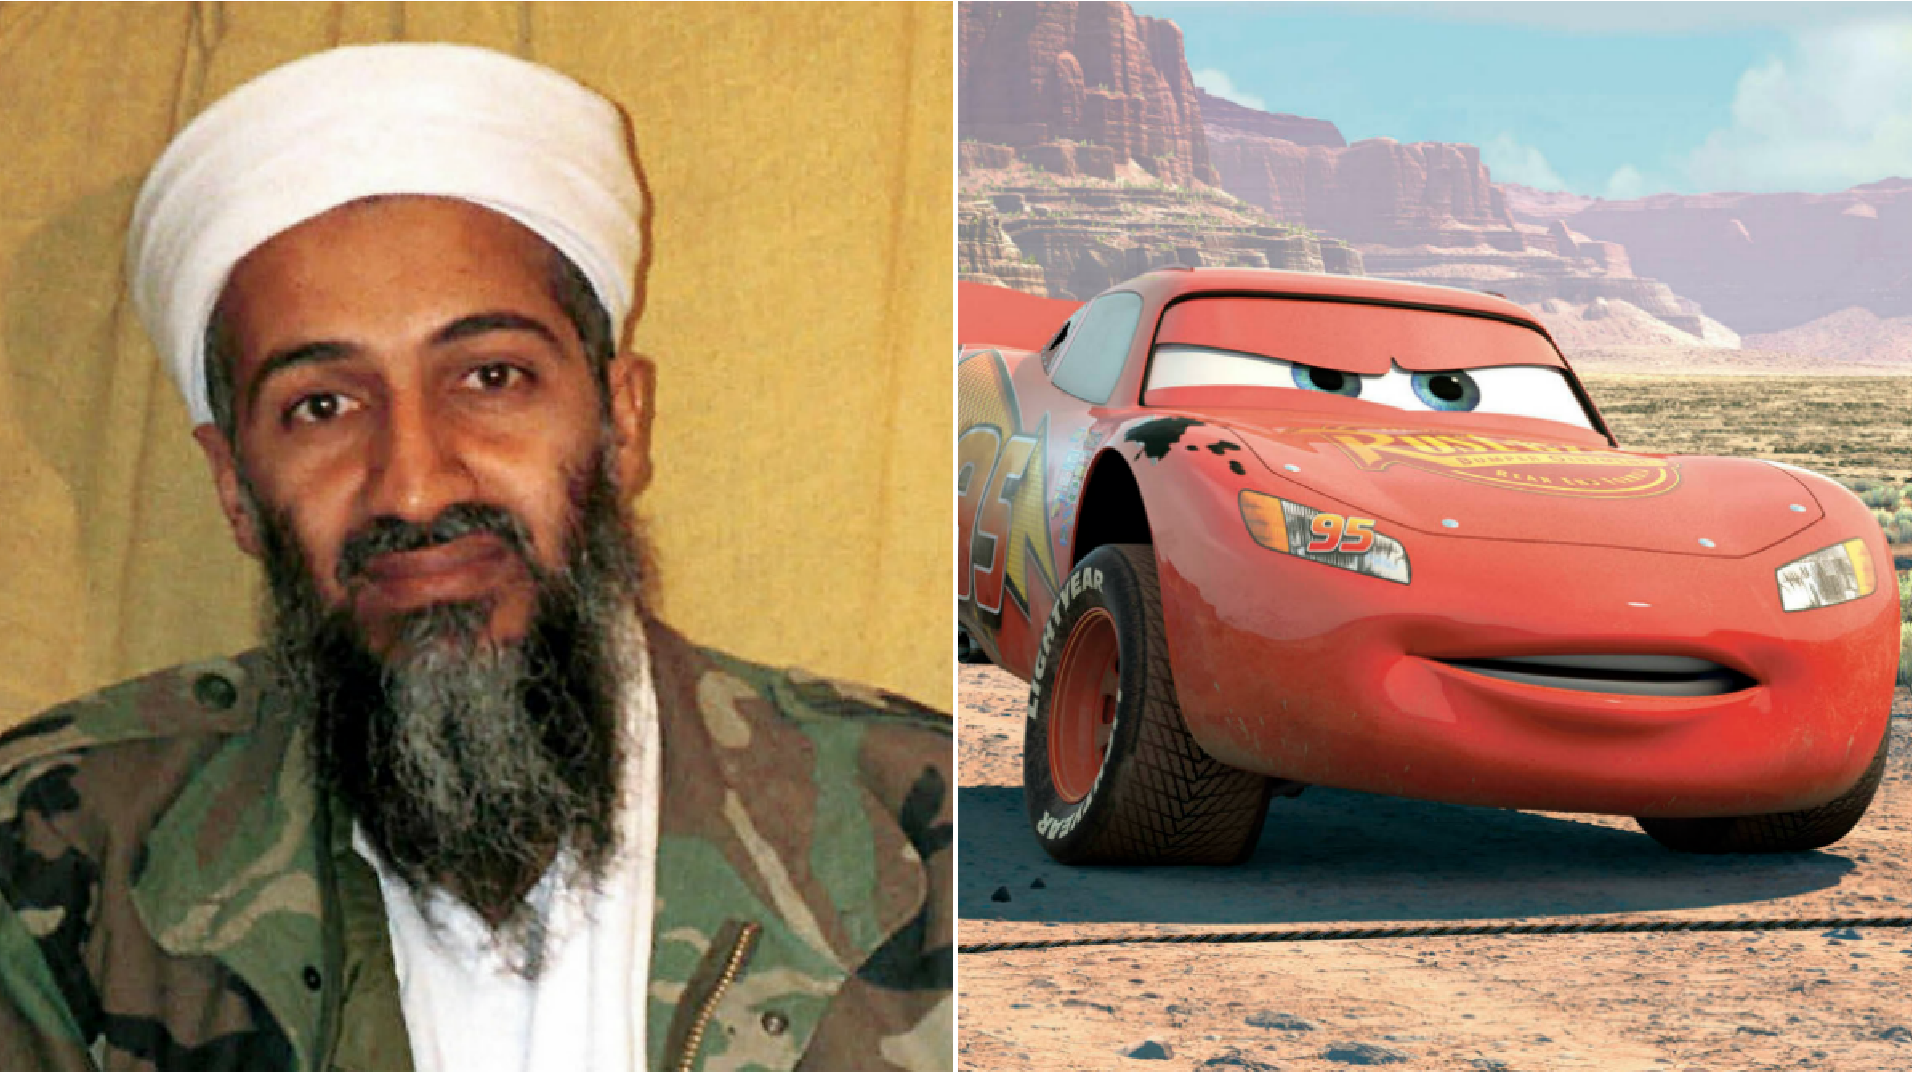 Osama bin Laden's video collection included kids' movies 'Antz' and 'Cars'  – Chicago Tribune